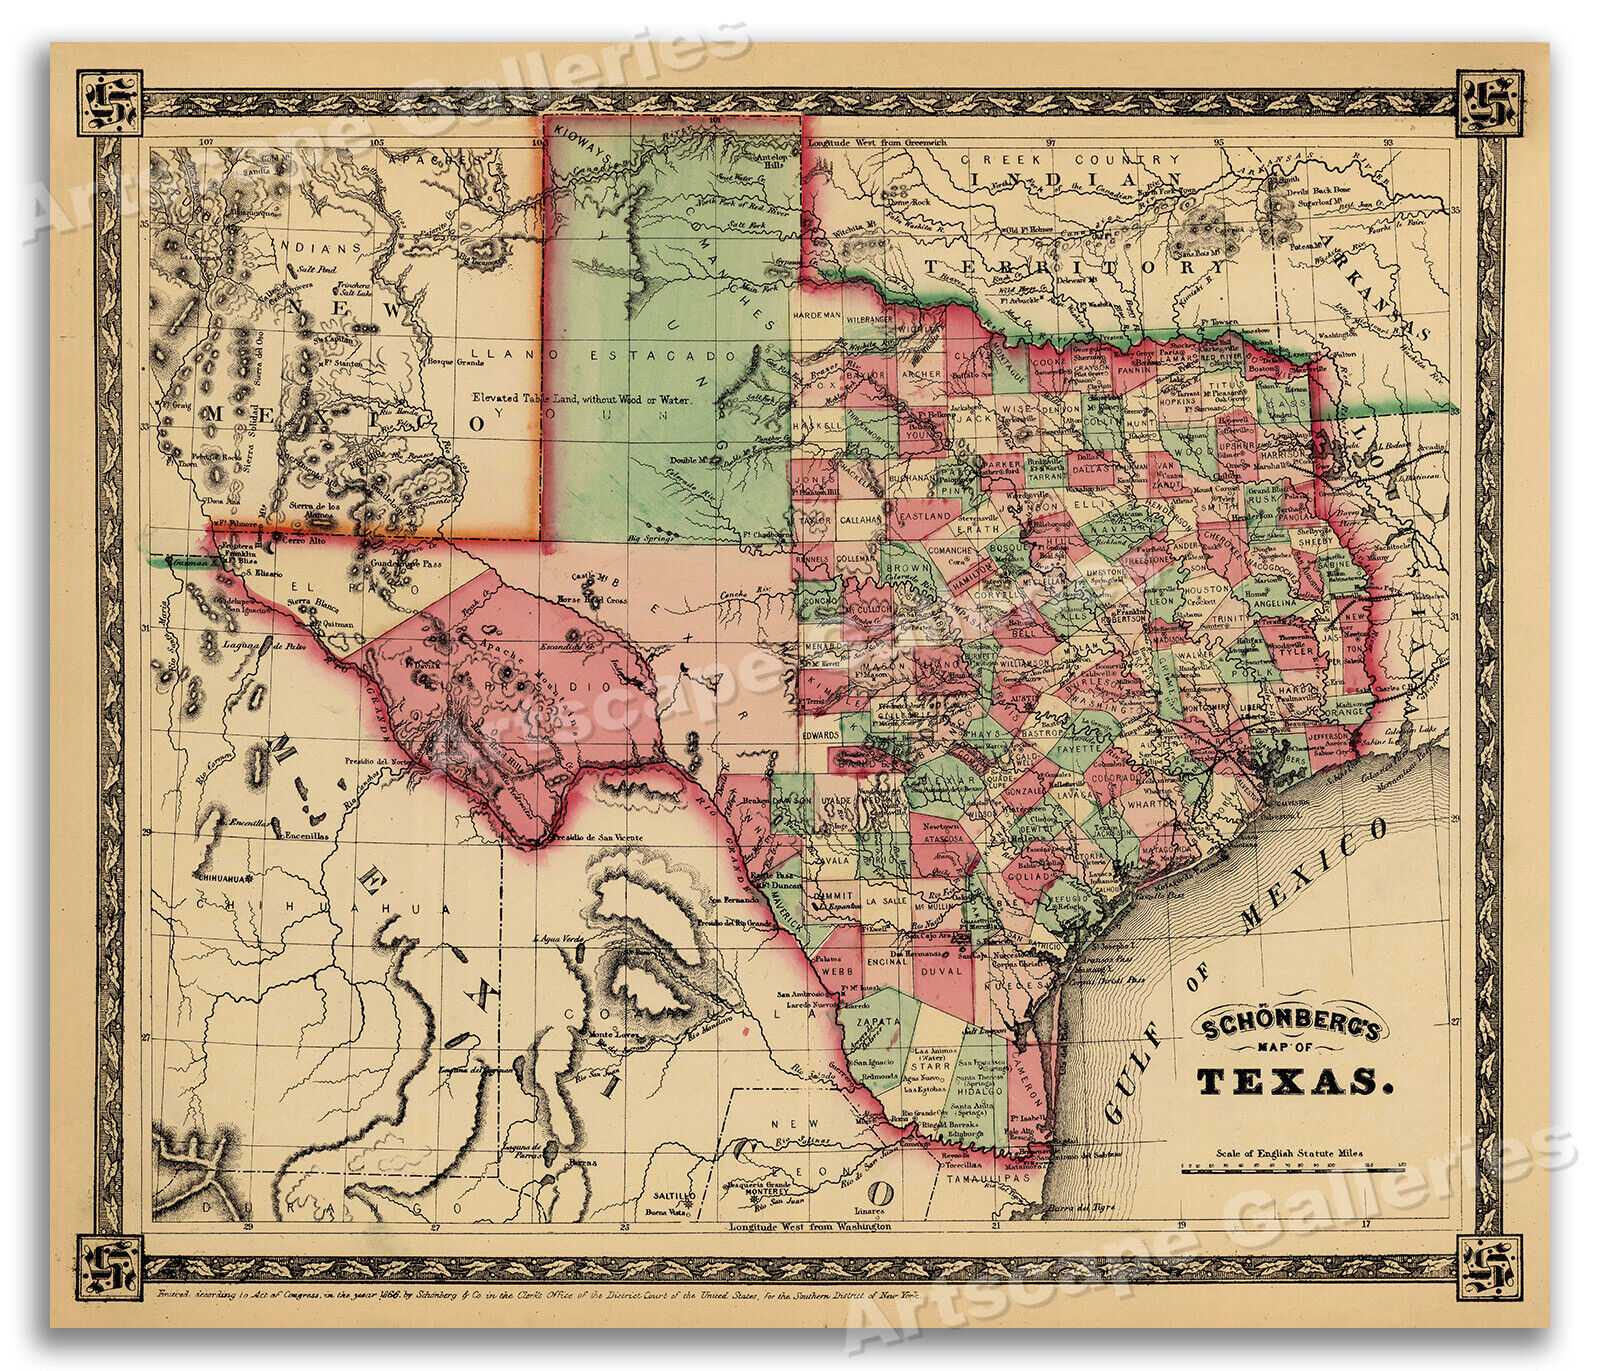 1866 Schönberg's Early Map of Texas Historic Map 24x28